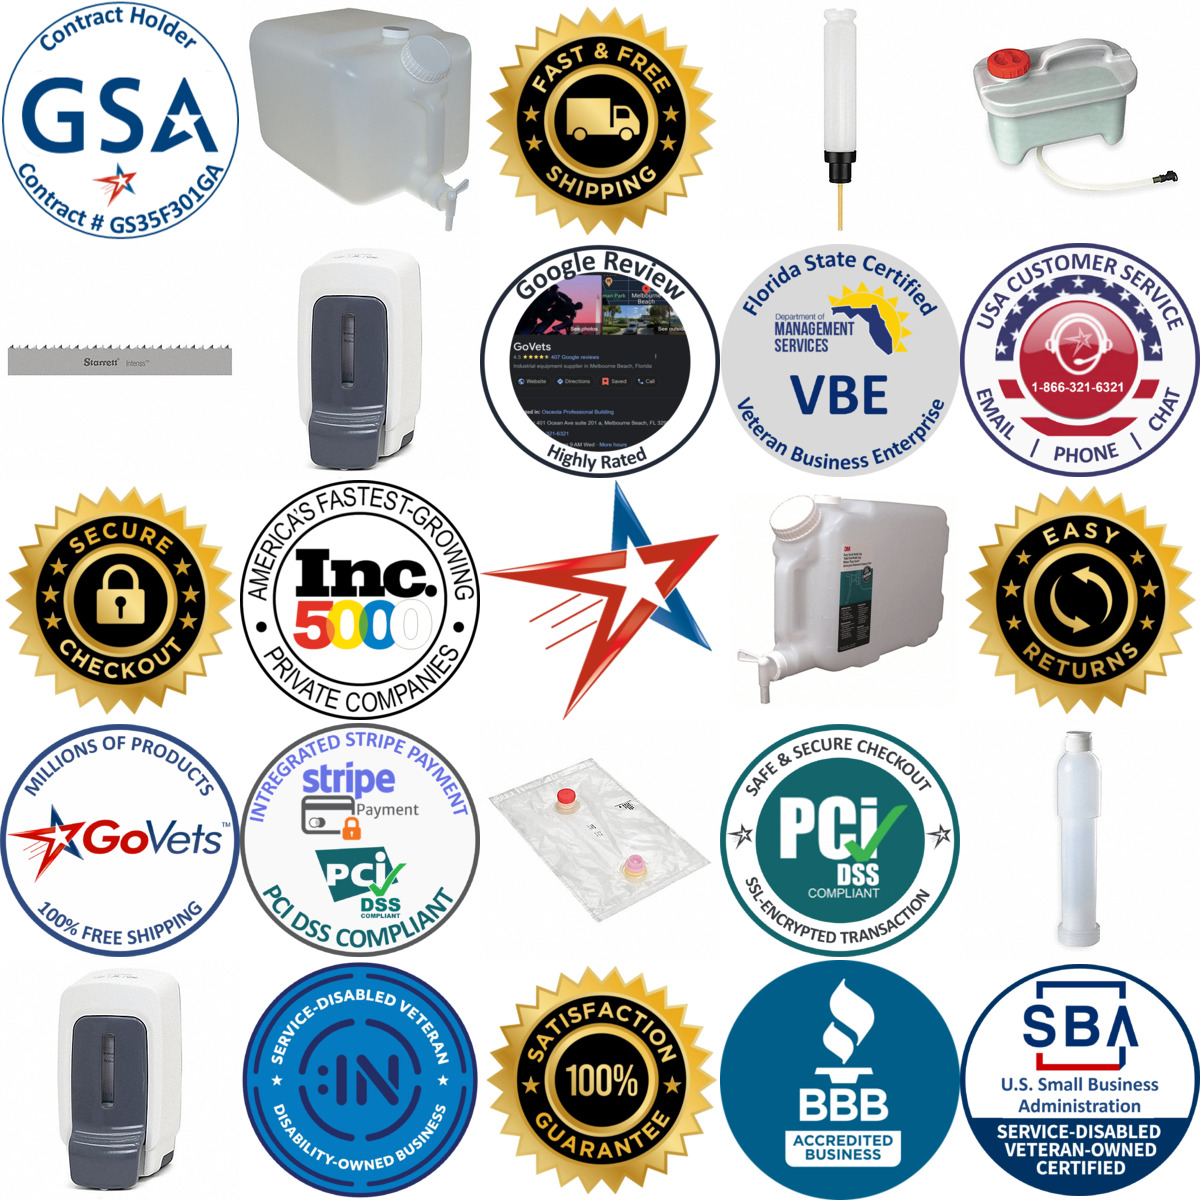 A selection of Dispensing Containers products on GoVets